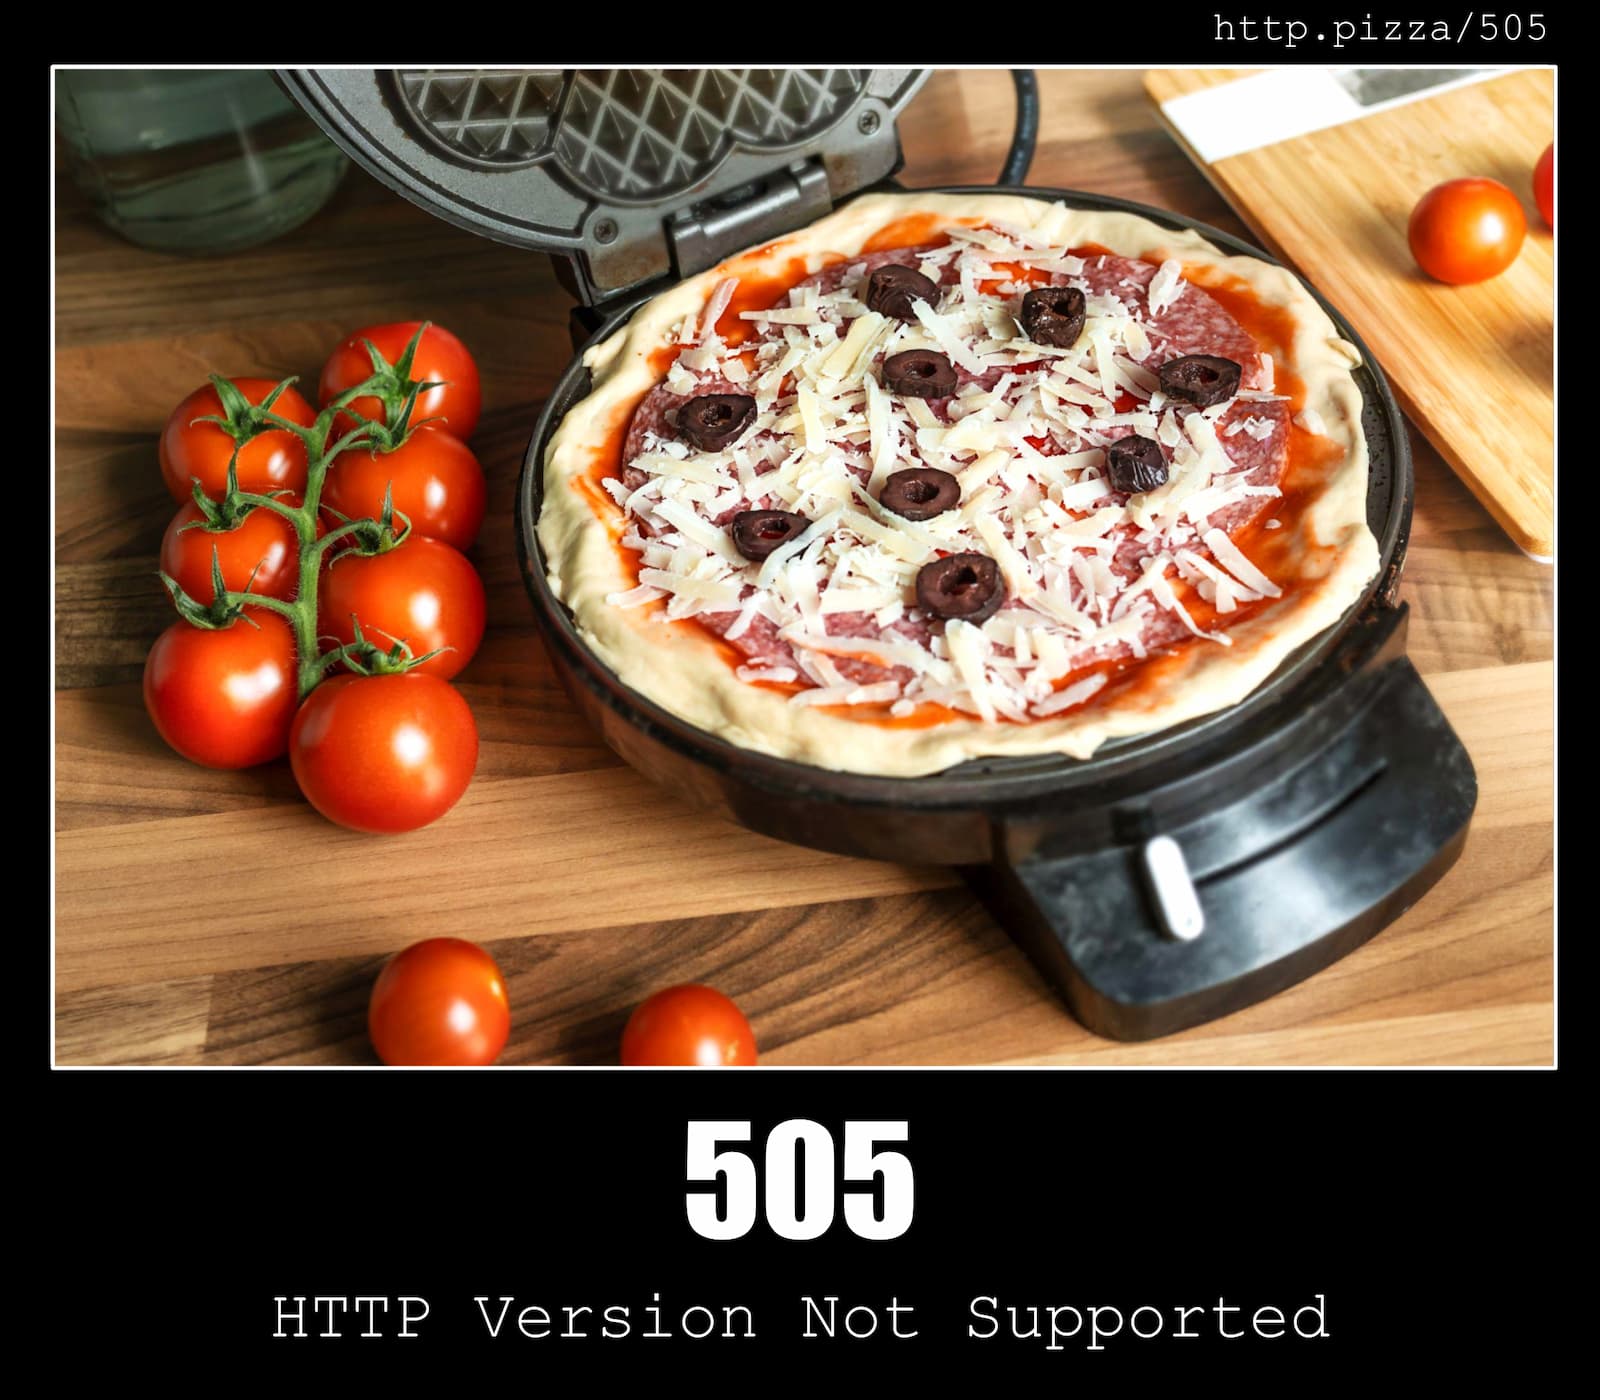 HTTP Status Code 505 HTTP Version Not Supported & Pizzas